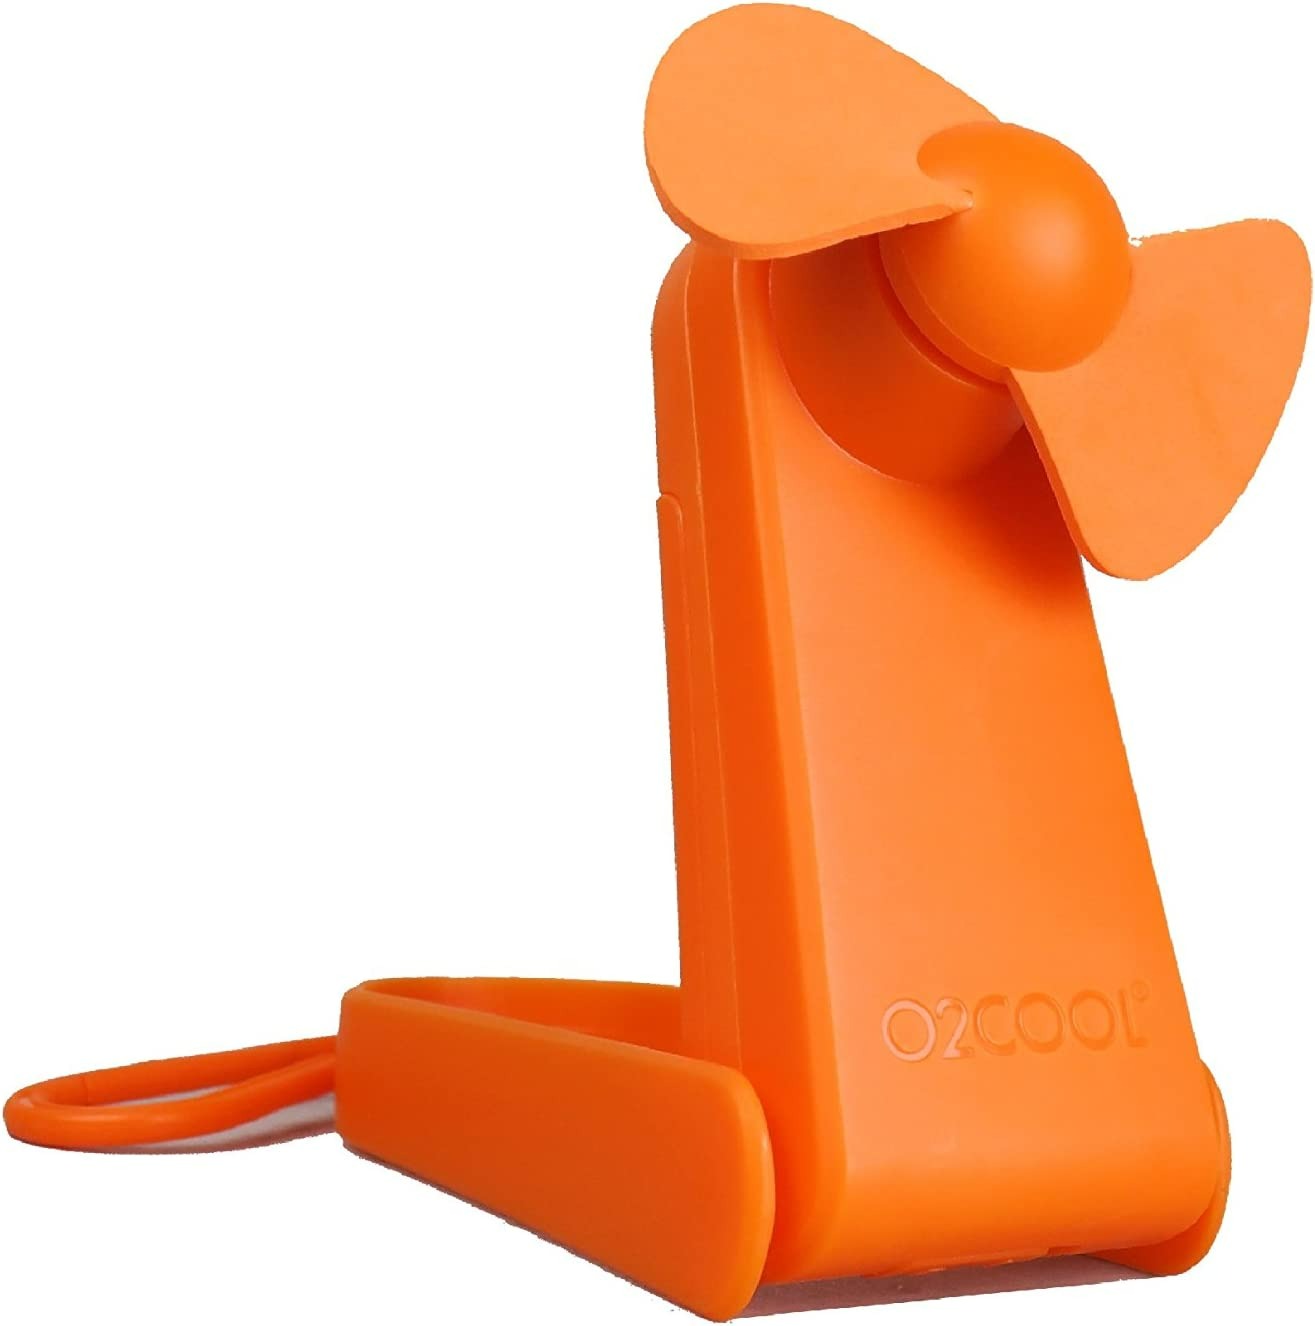 O2COOL Personal Battery Pocket and Table Desk Fan - Orange